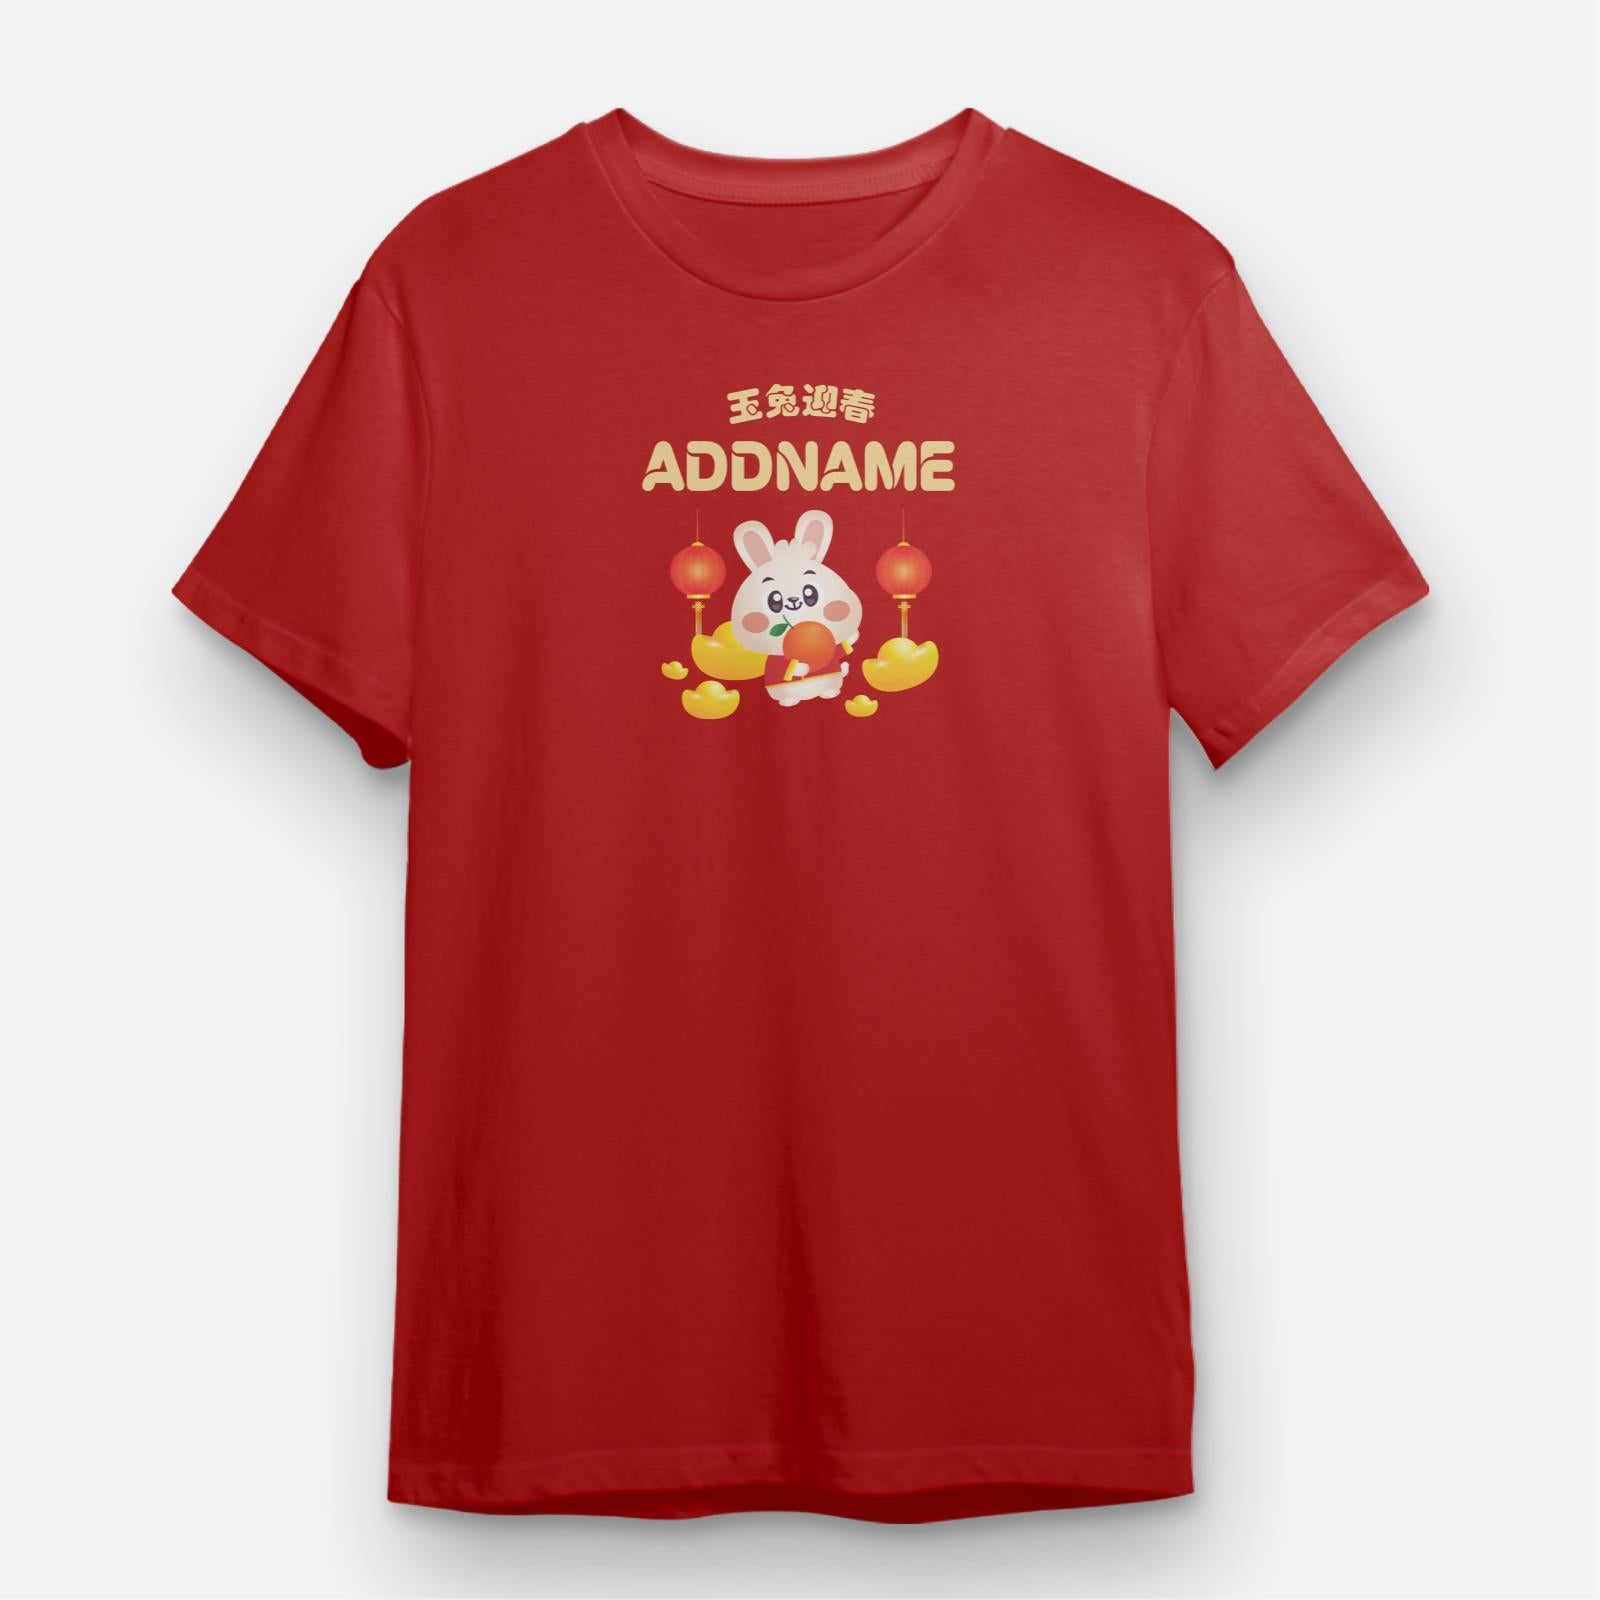 Cny Rabbit Family - Brother Rabbit Unisex Tee Shirt with English Personalization